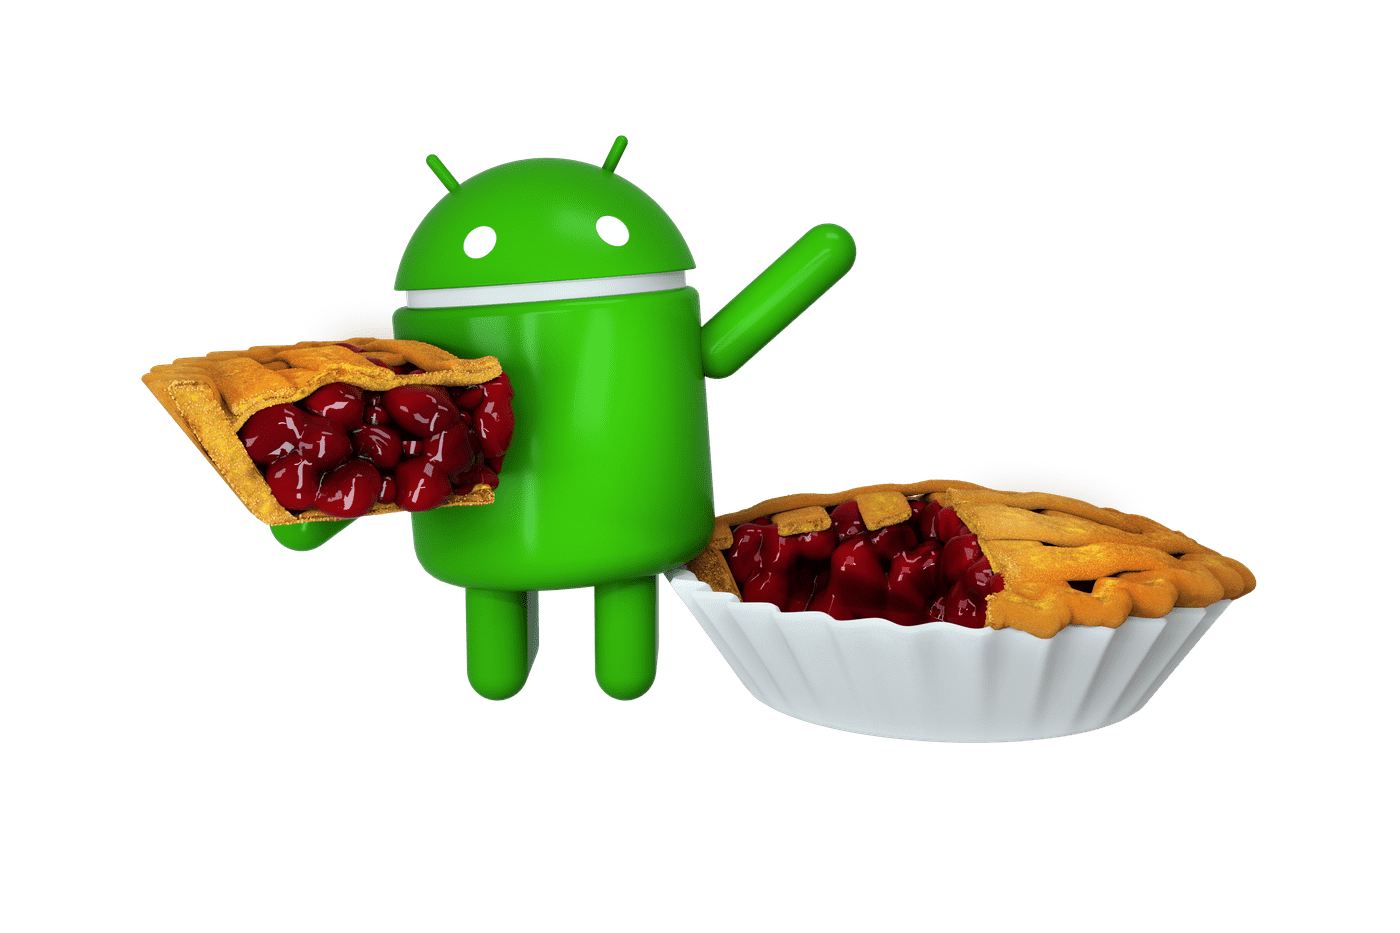 Hungry anyone, Google has Pie for you